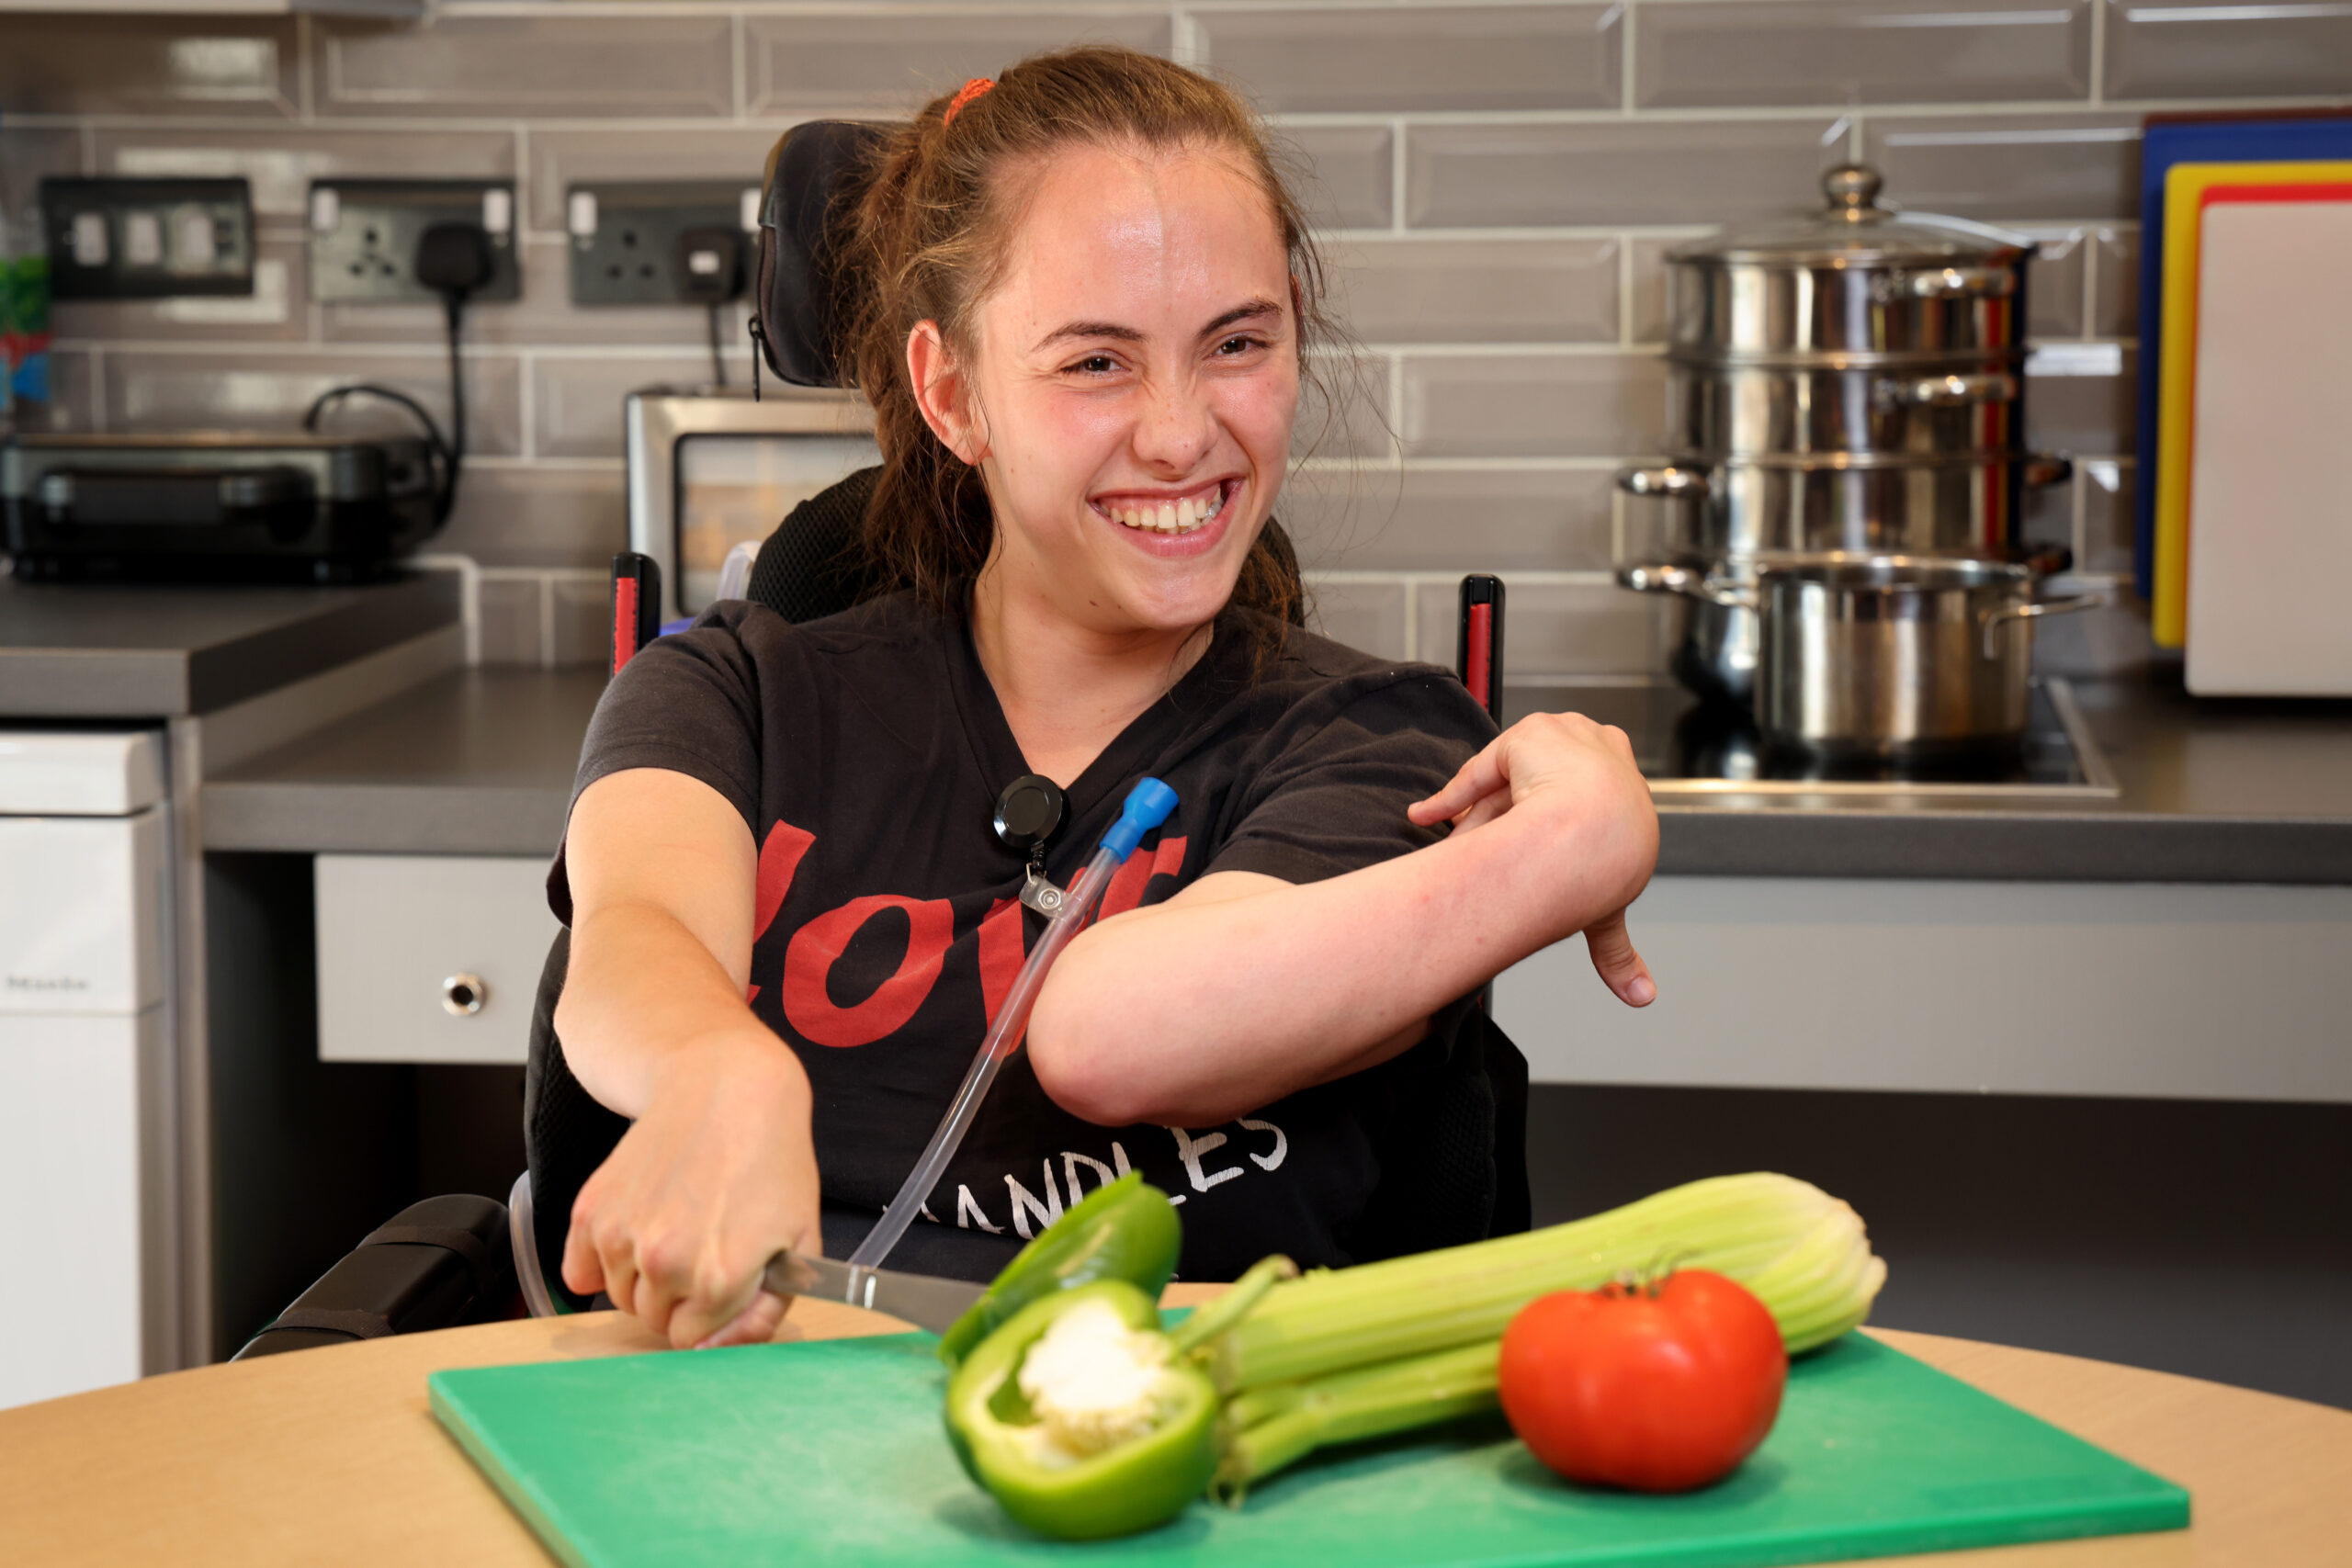 An Adult Community Learning student at a cookery course